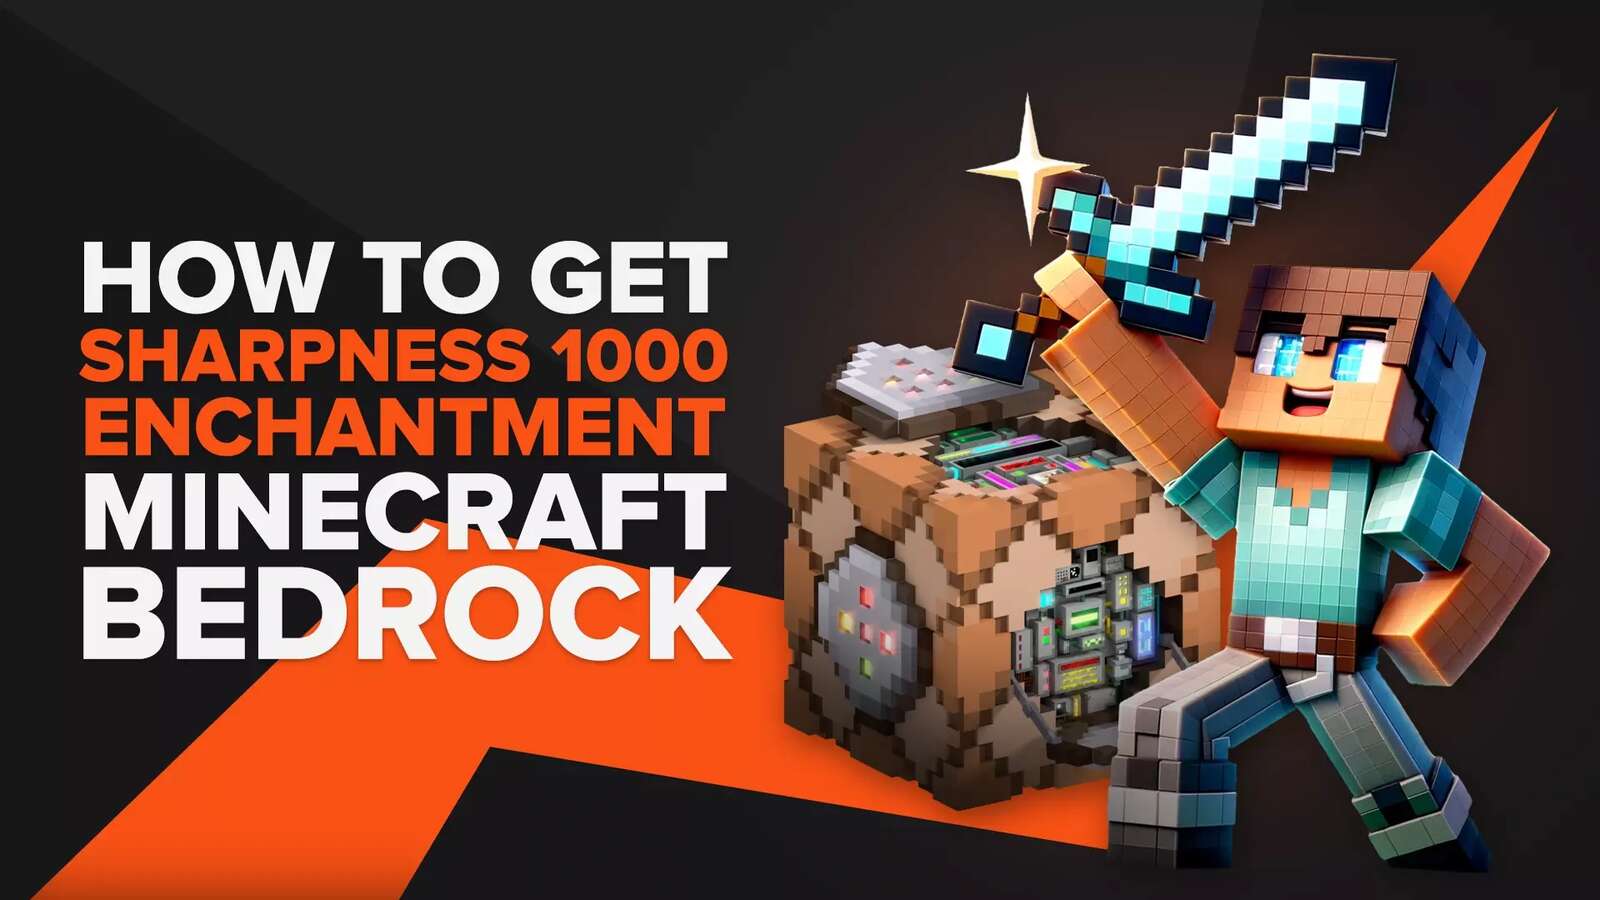 How to Get Sharpness 1000 Enchantment in Minecraft Bedrock